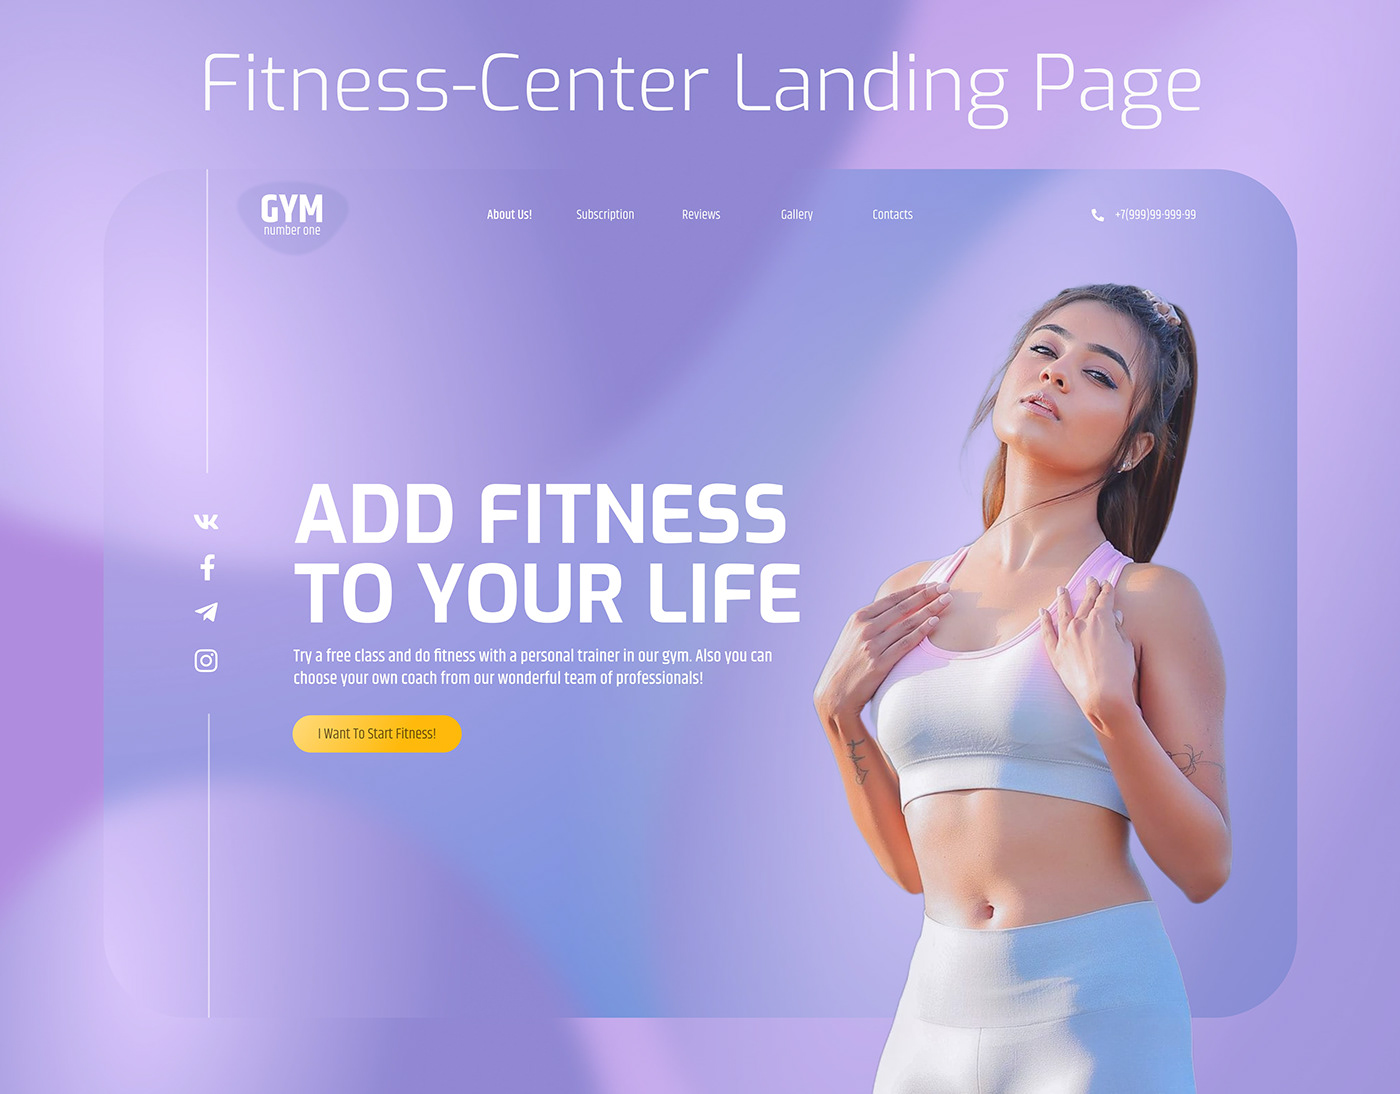 Crossfit fitness gym landing page sport sports training workout спорт фитнес